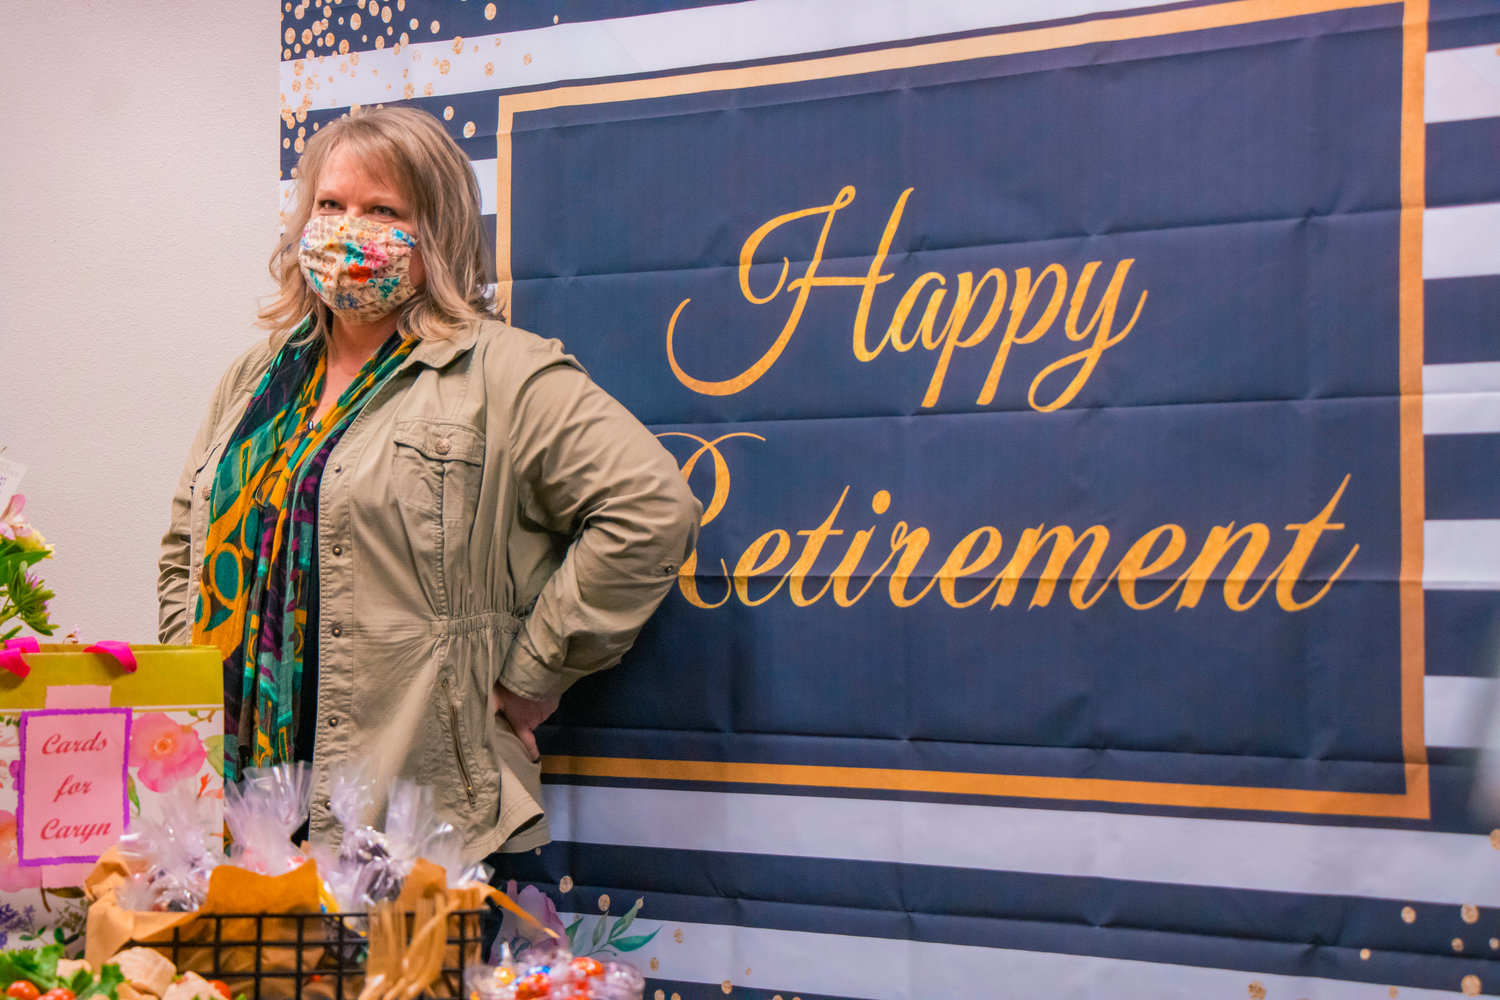 Caryn Foley stands in front of a banner that reads "Happy Retirement" on Tuesday in Chehalis.